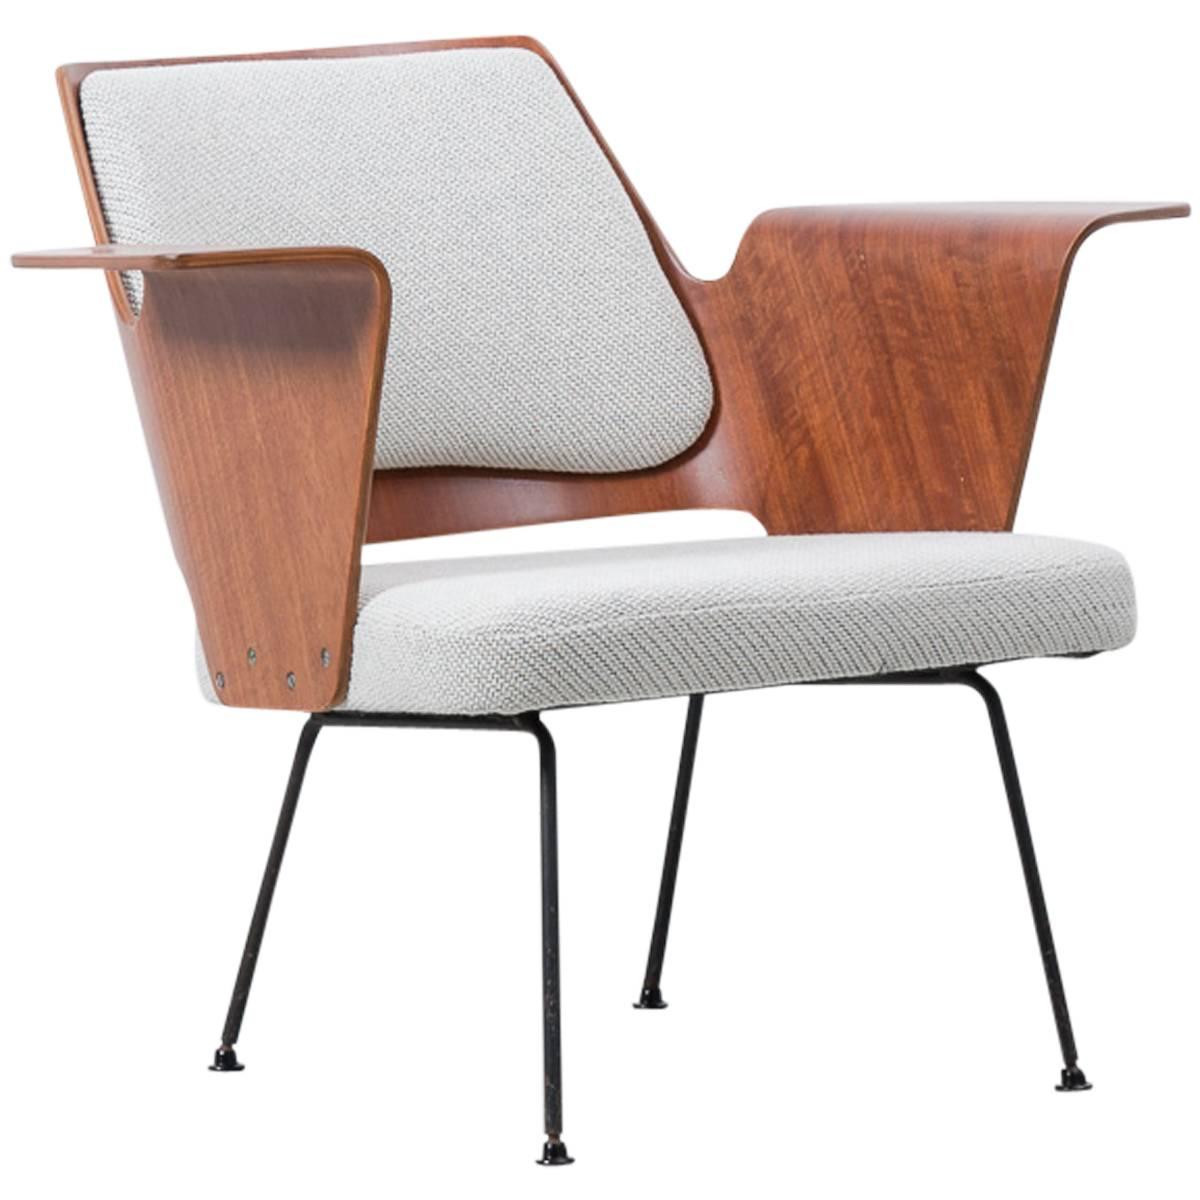 Robin Day Festival Hall Chair Hille, UK, 1951